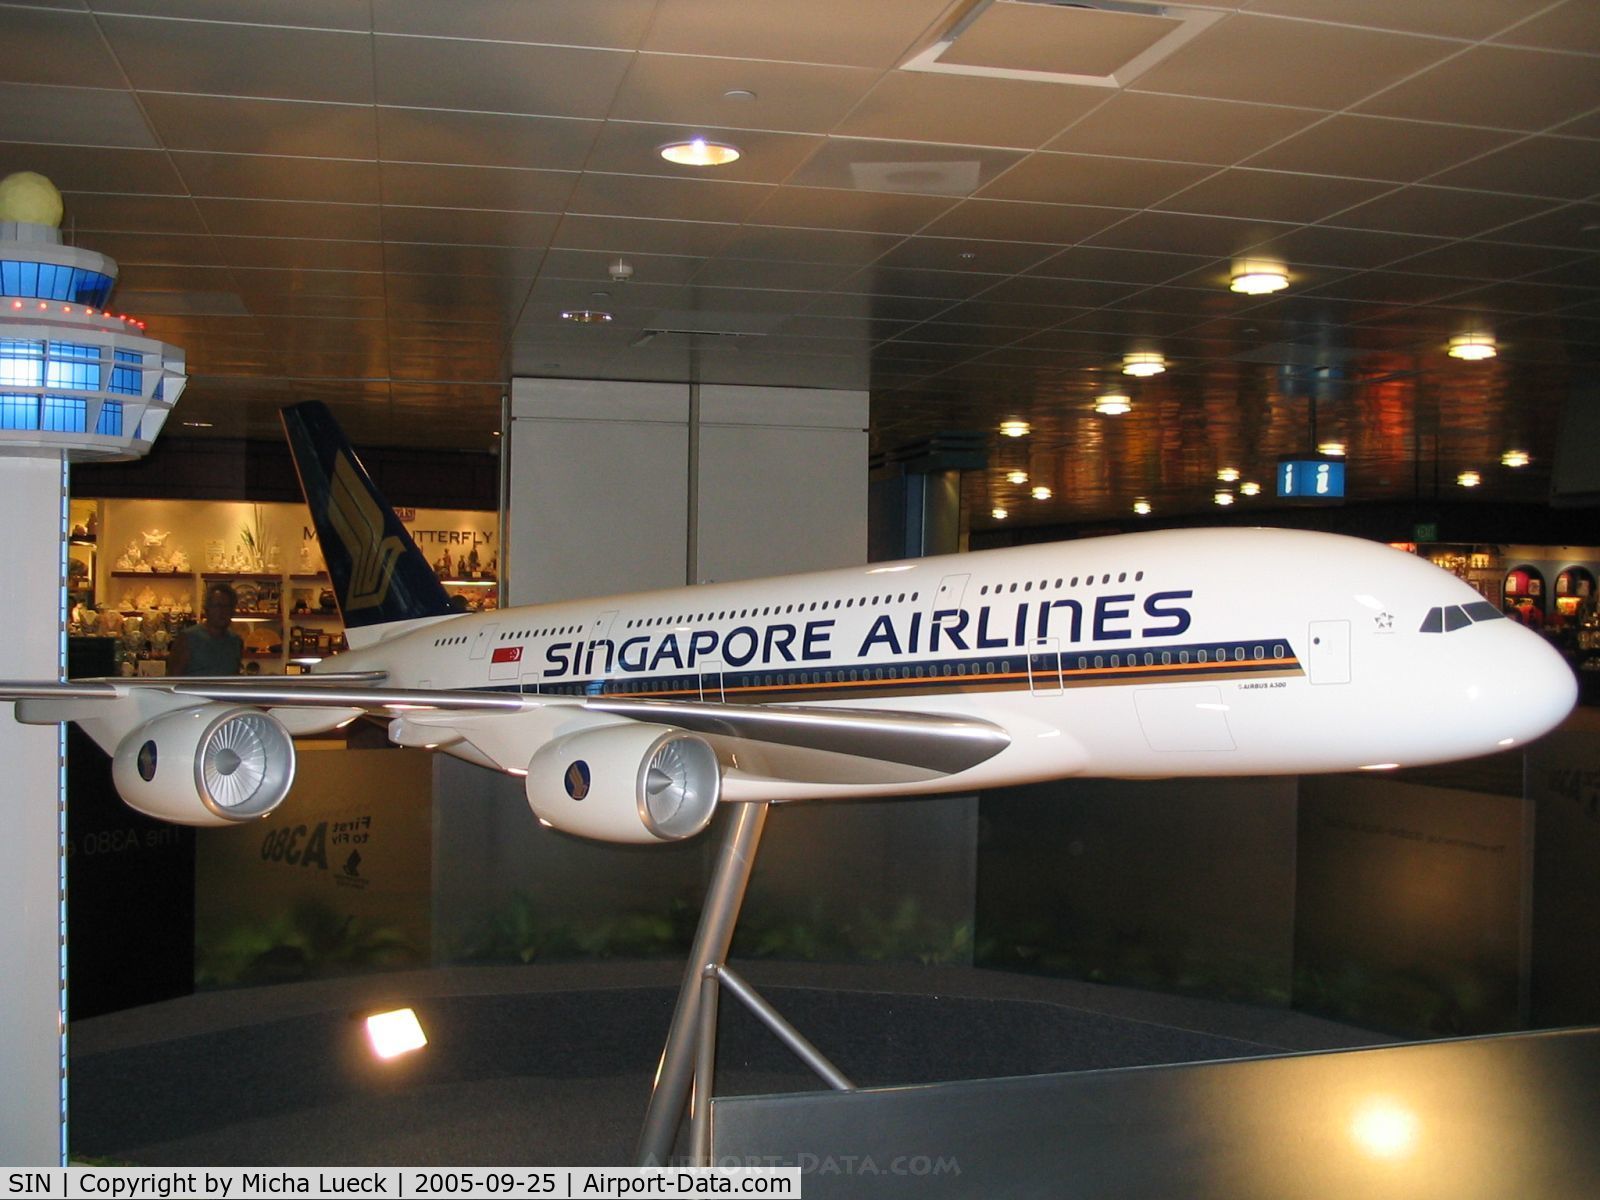 Singapore Changi Airport, Changi Singapore (SIN) - A380 model at Changi airport. Singapore Airlines is the launch customer for this impressive beast (to be delivered late 2006)